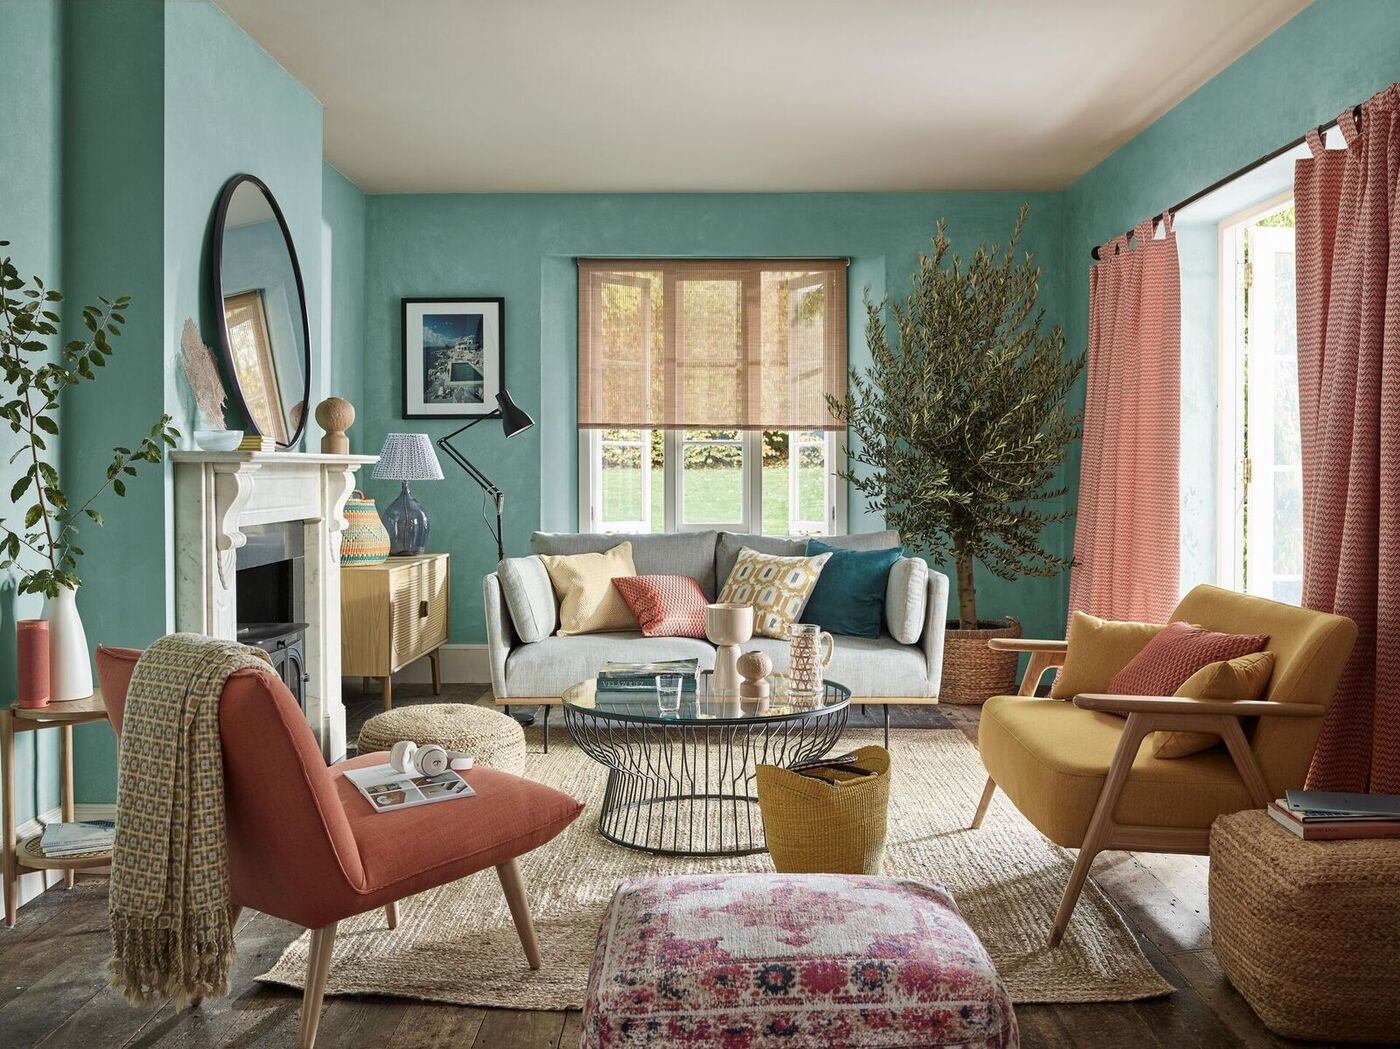 Color Therapy: Therapists Swear These Hues Boost Your Mood